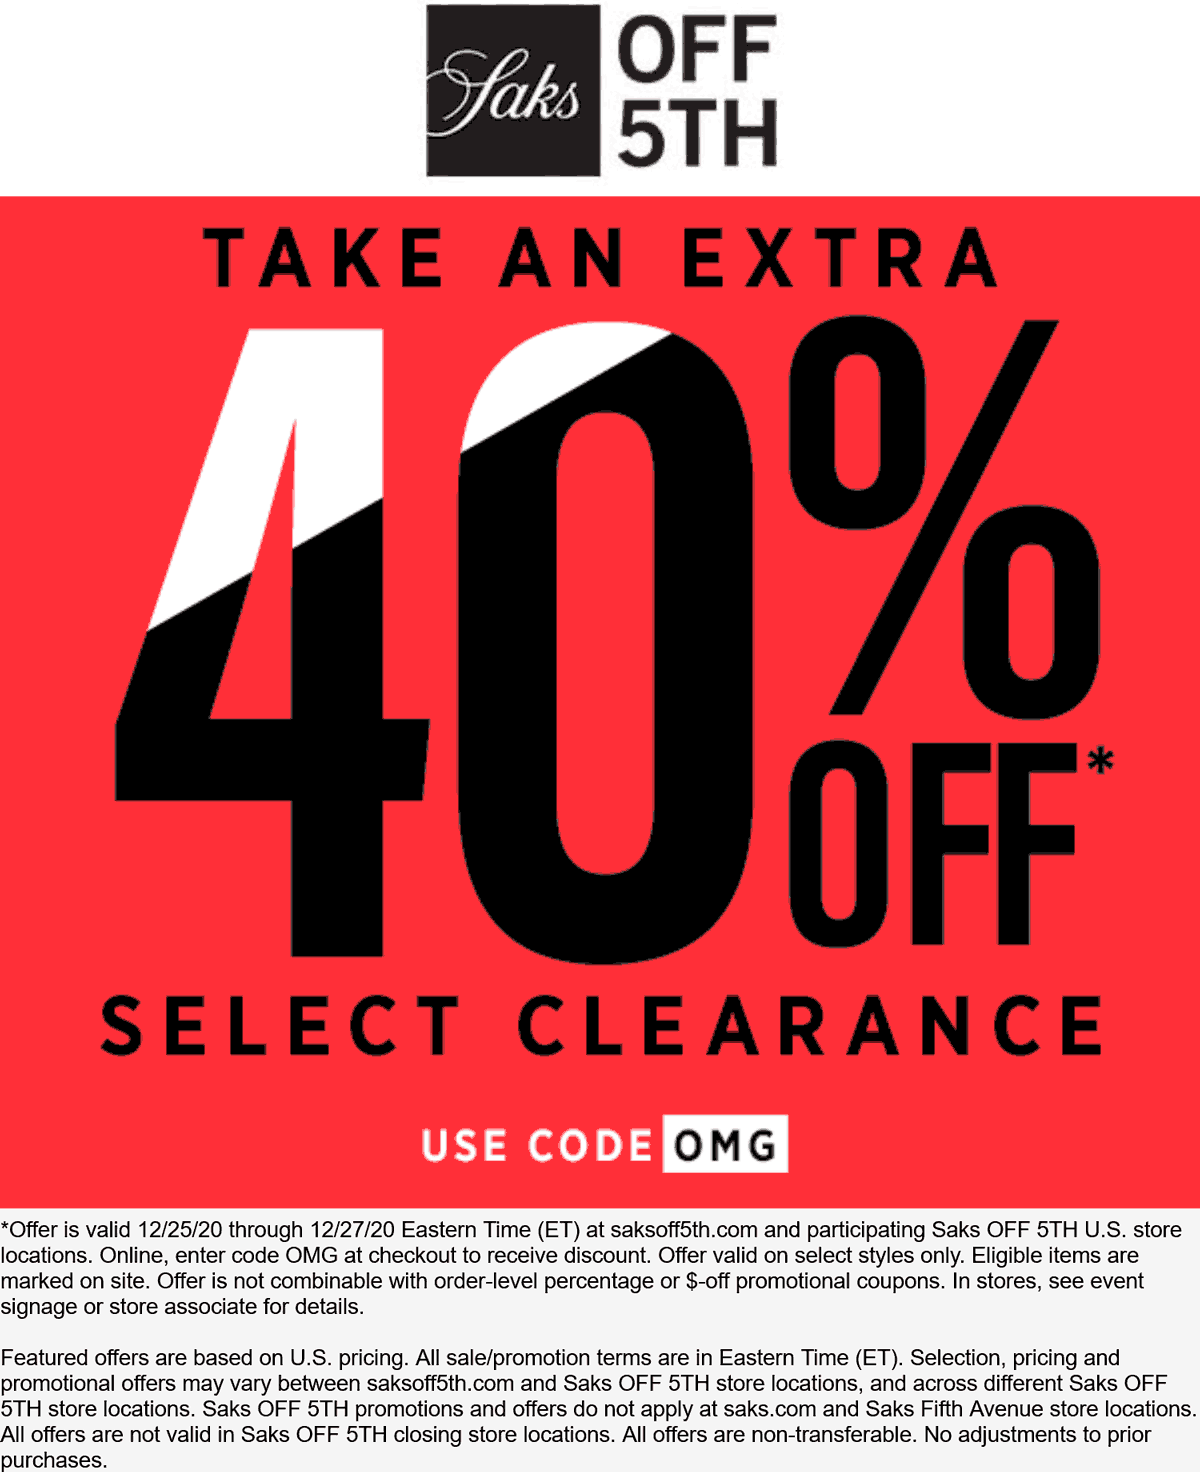 Extra 40 off clearance at Saks OFF 5TH via promo code OMG off5th